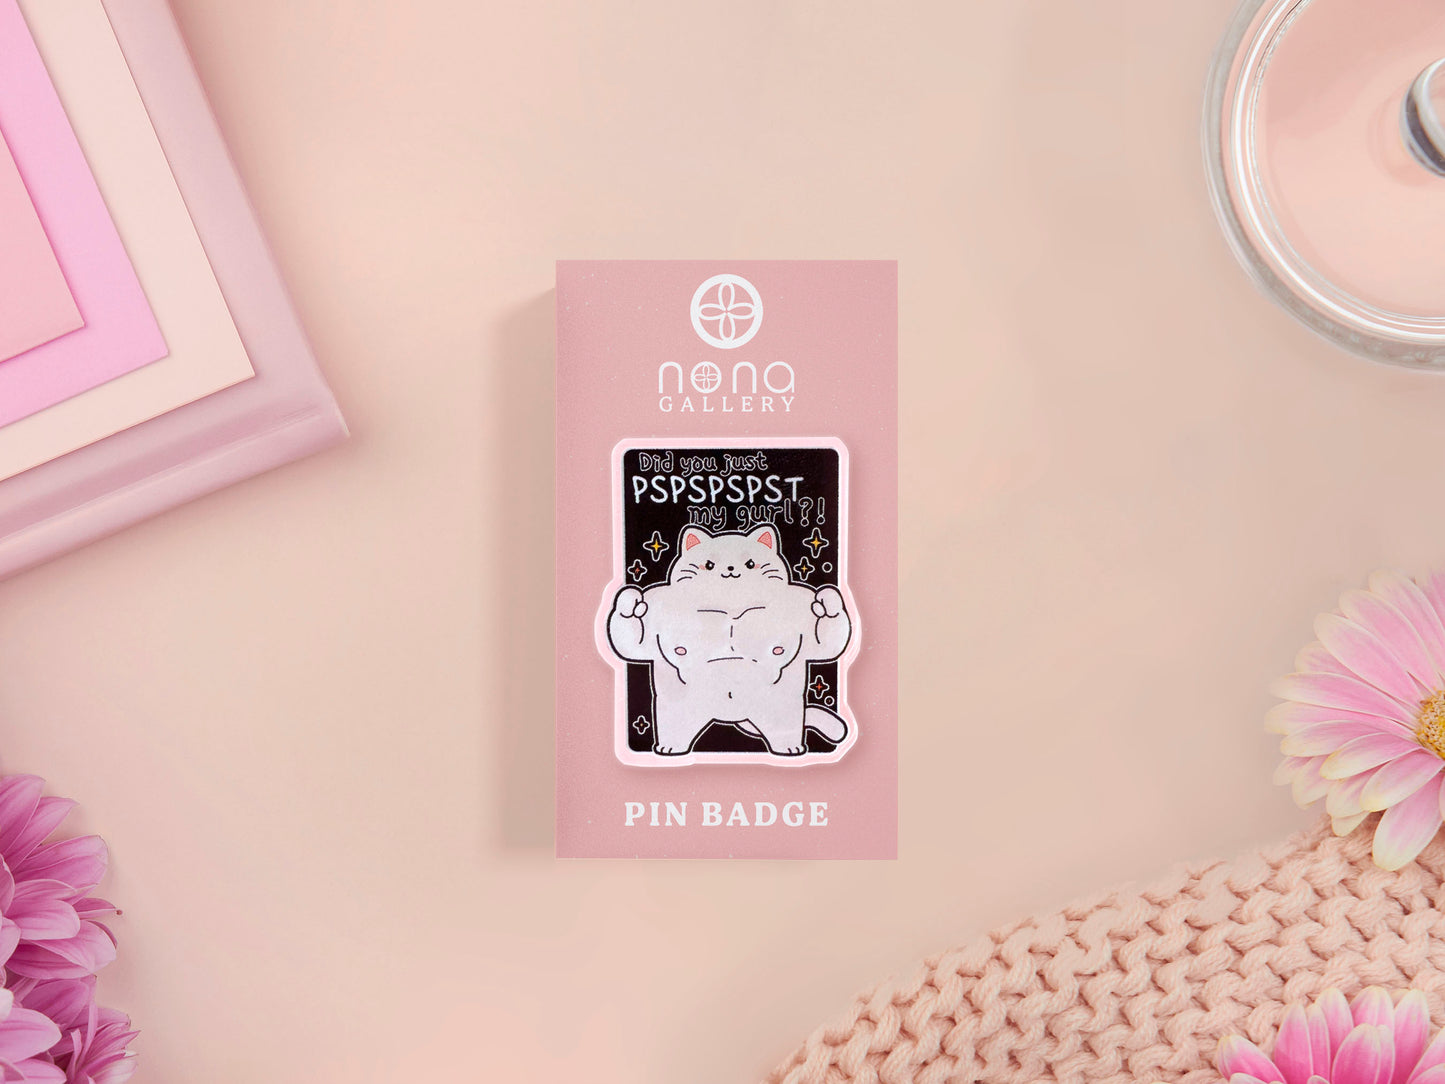 Acrylic pin badge brooch with cute white cat muscular hench buff illustration design with the the funny text did you just pspspst my girl?!